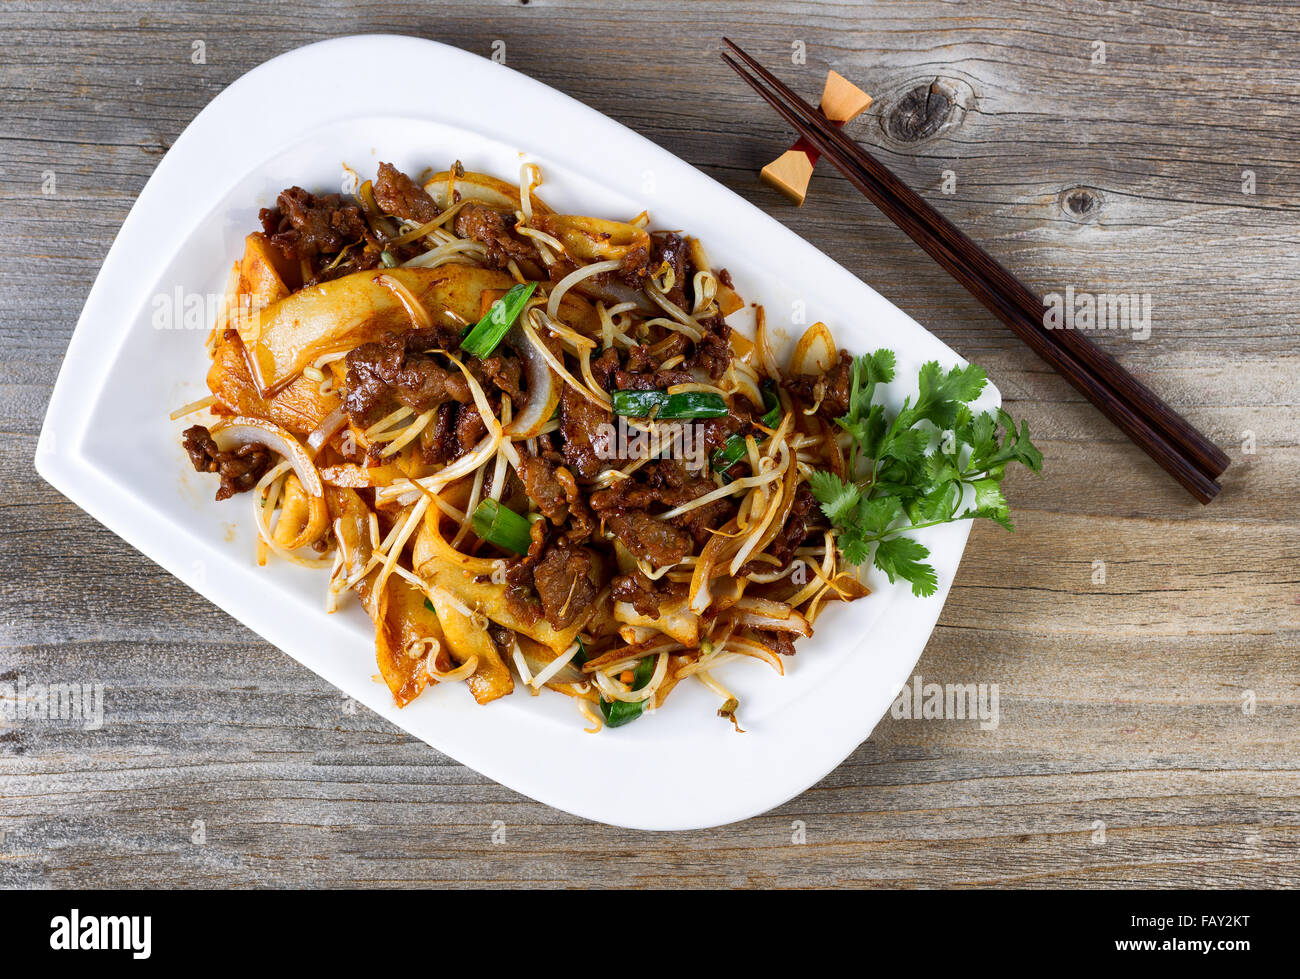 Top view of freshly cooked spicy beef, bean sprouts, onion, tofu with parsley as garnish and chopsticks in holder on rustic wood Stock Photo